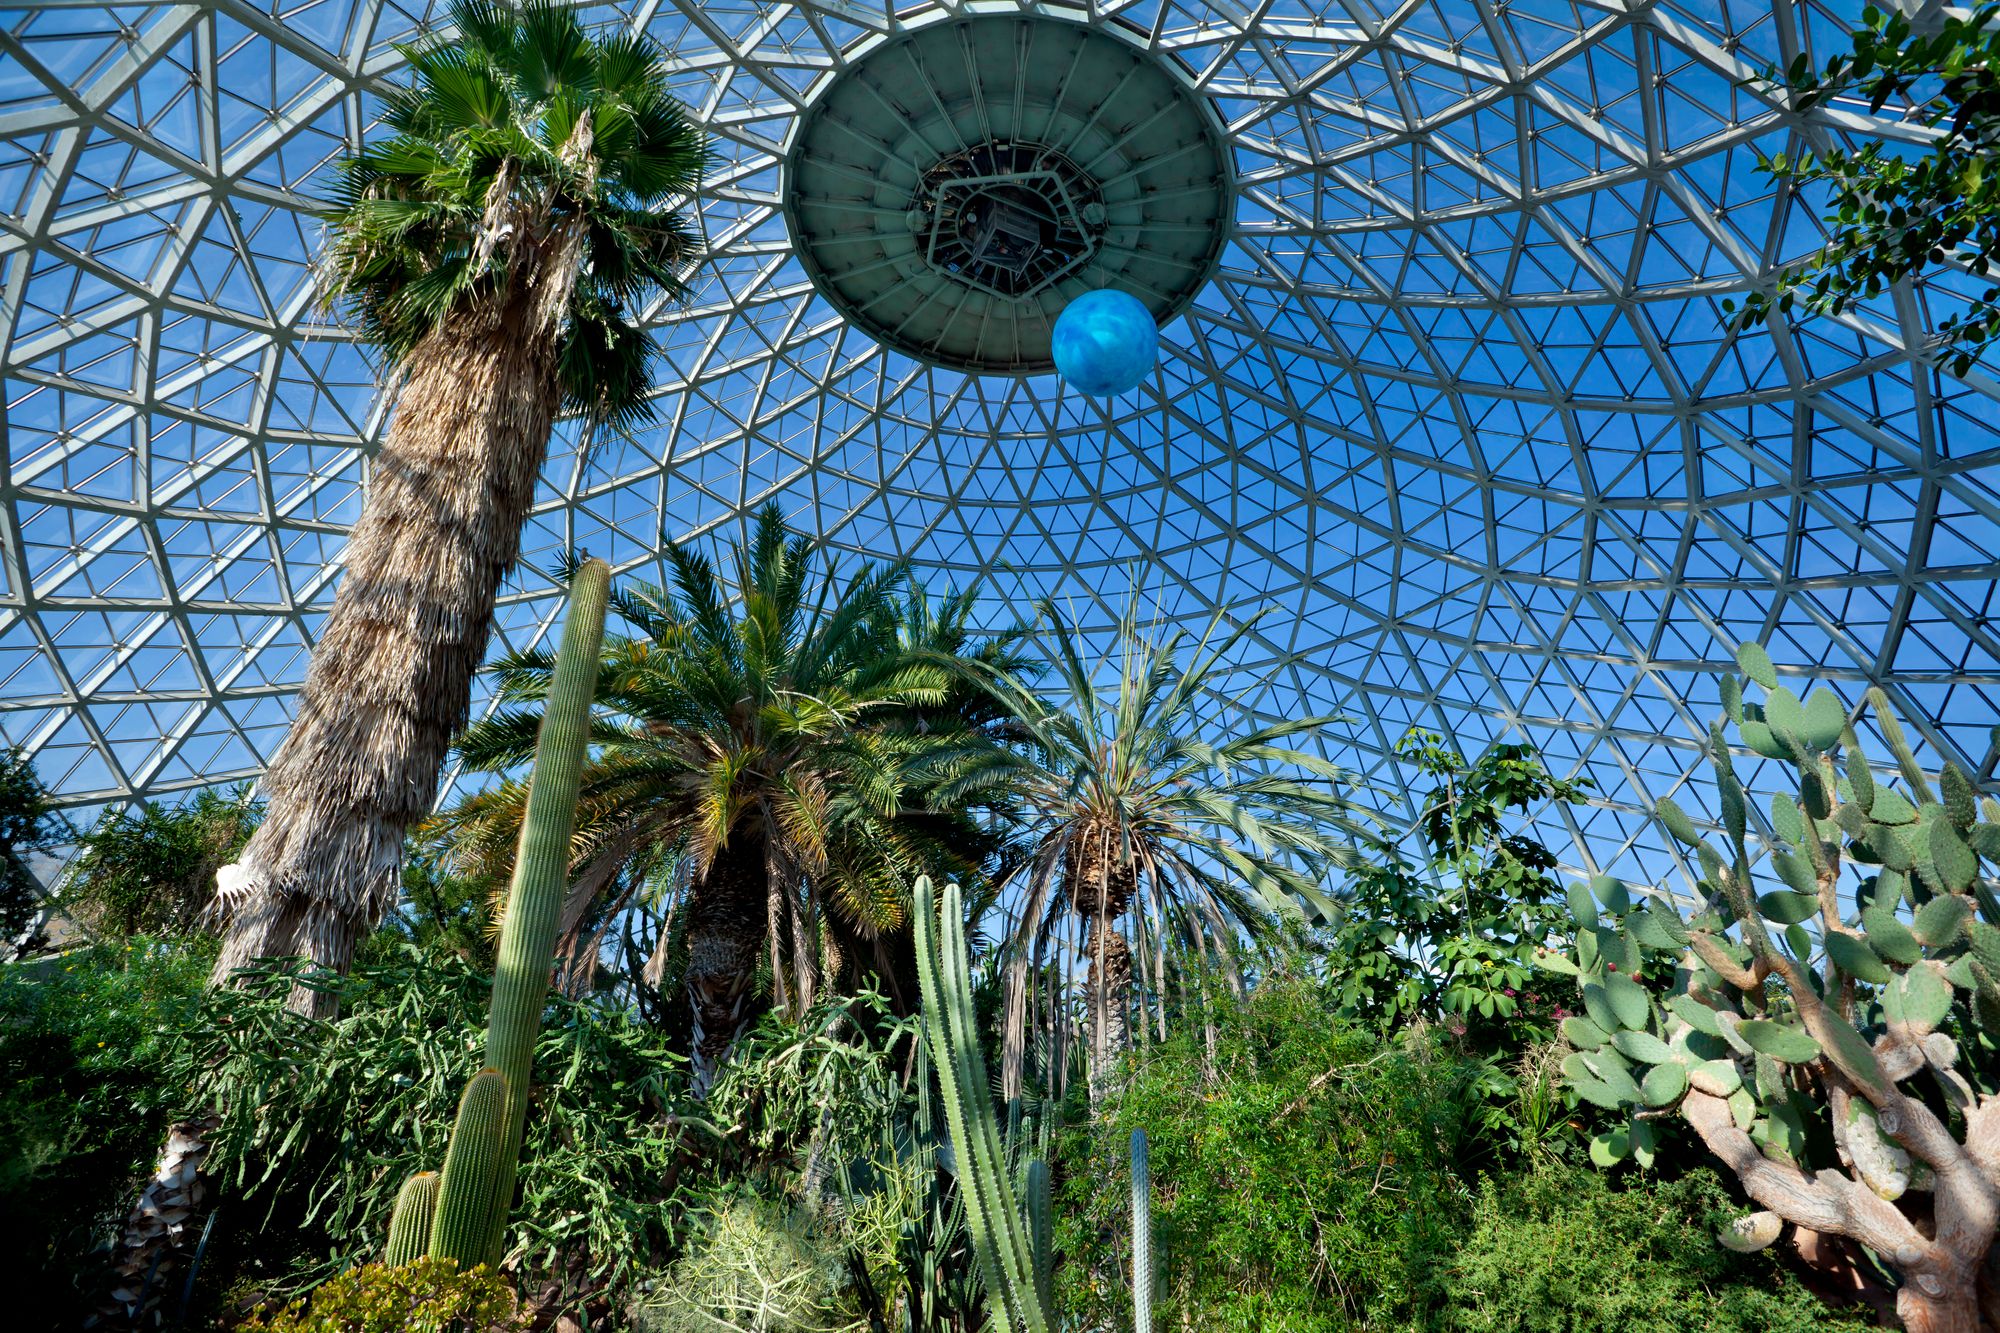 Tropica geodesic dome filled with palm trees and cactus - Aneese @iStockPhoto